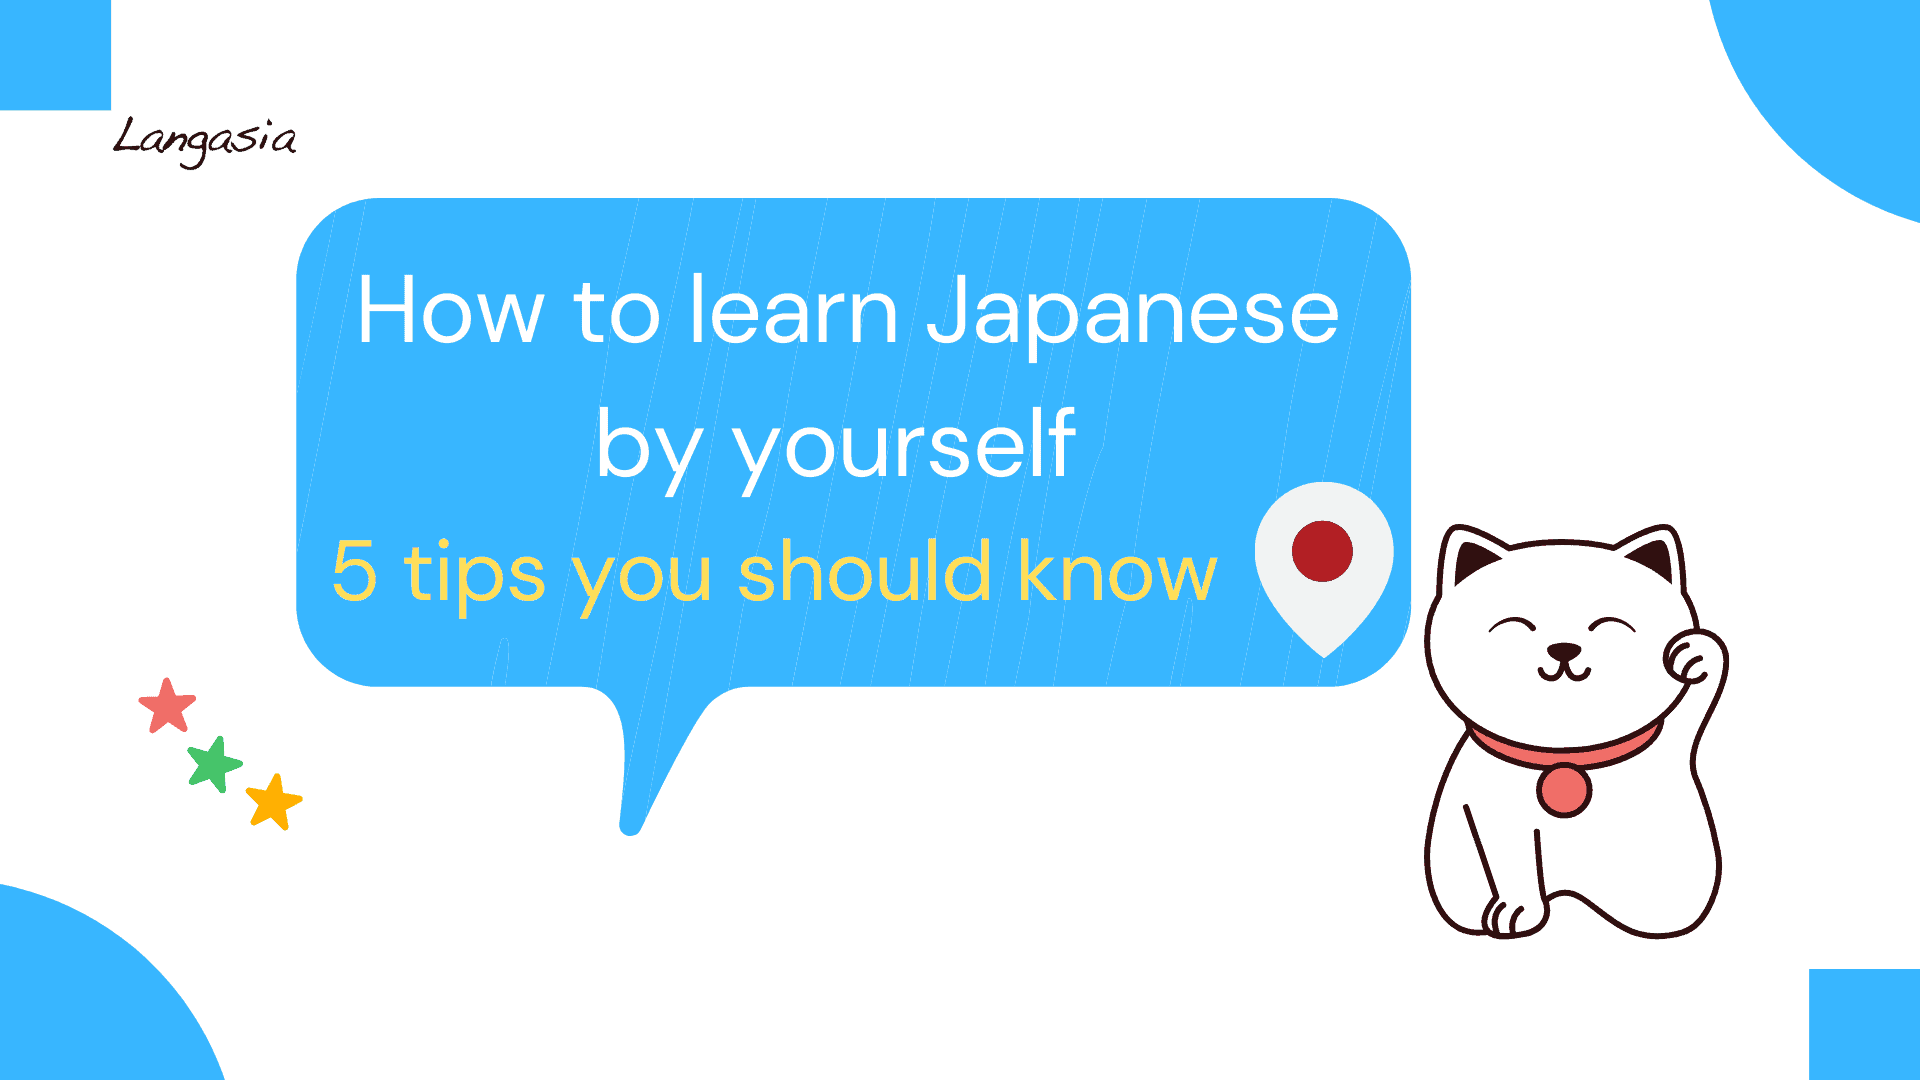 How to learn Japanese by yourself - 5 tips you should know